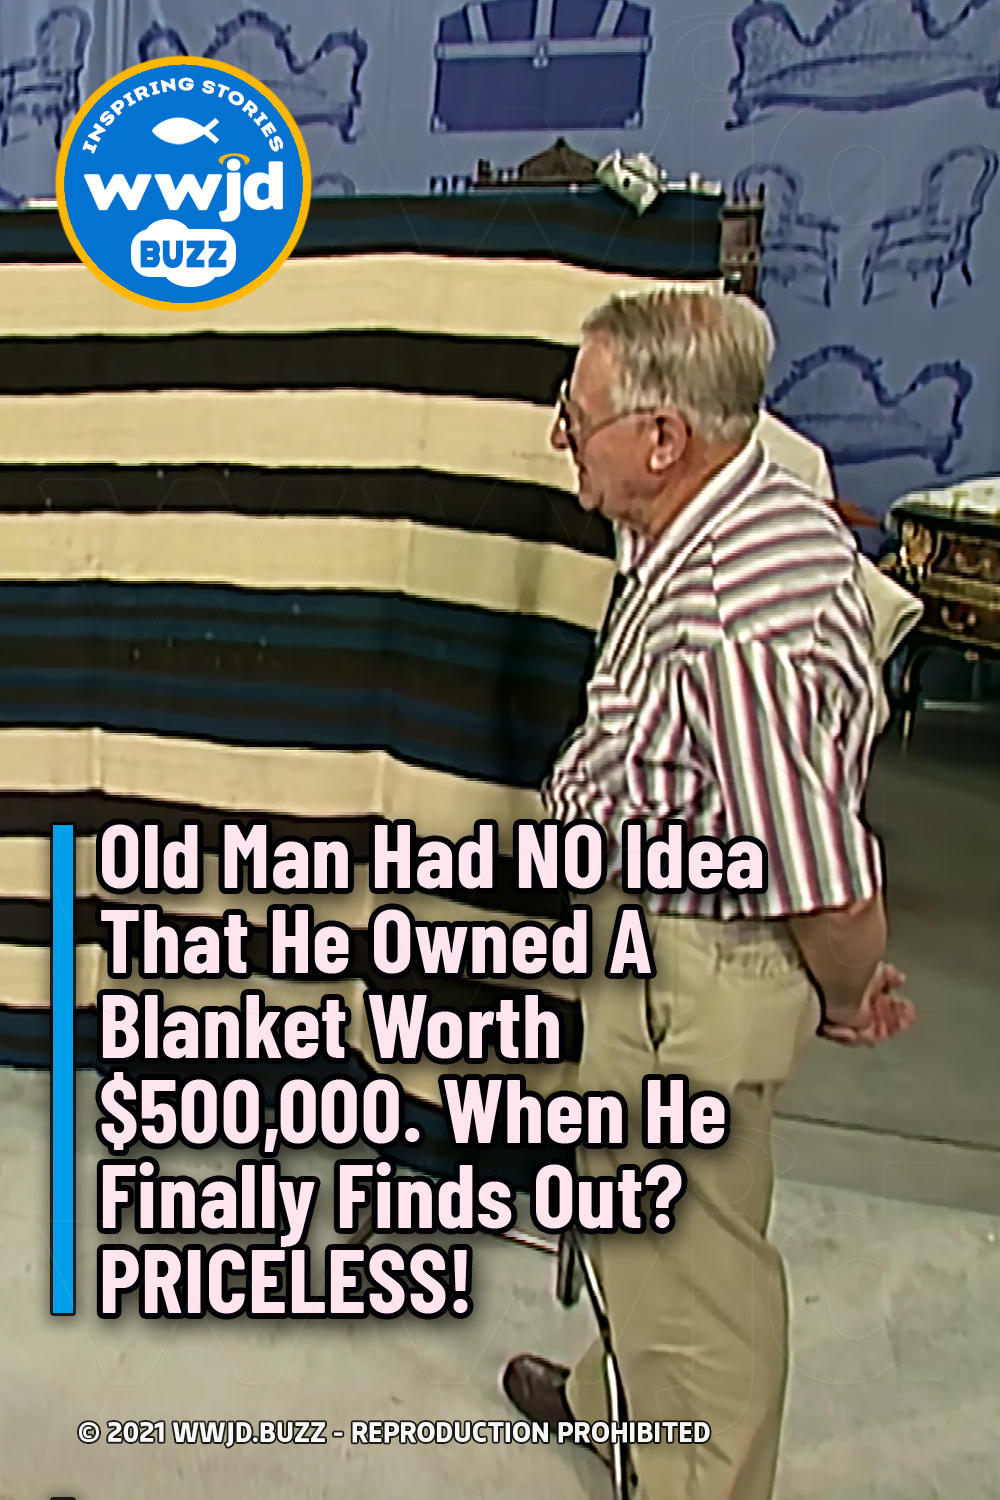 Old Man Had NO Idea That He Owned A Blanket Worth $500,000. When He Finally Finds Out? PRICELESS!